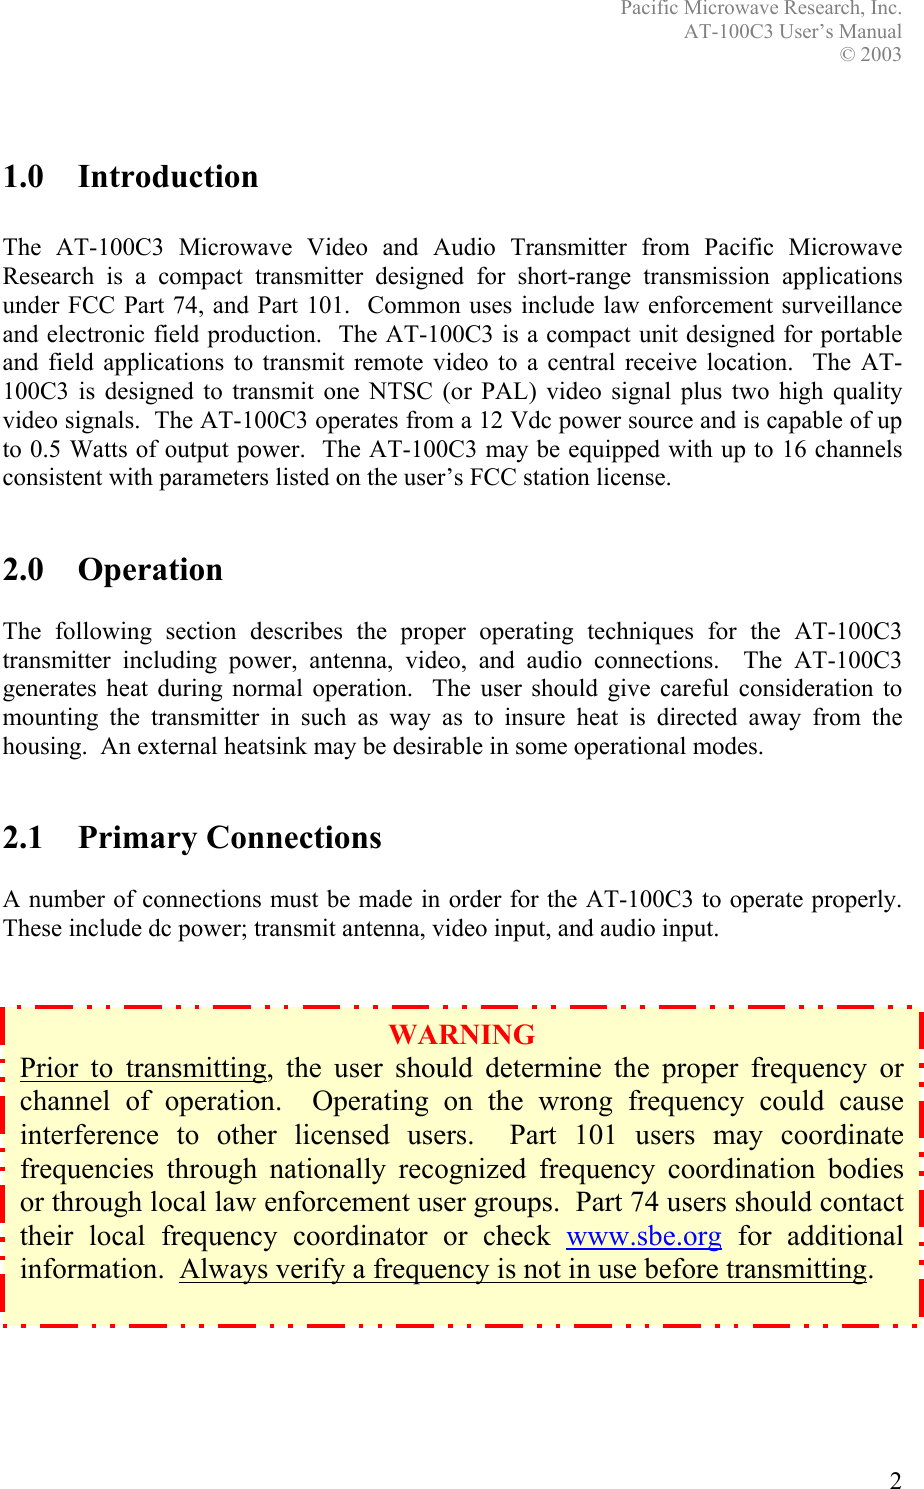 Pacific Microwave Research, Inc. AT-100C3 User’s Manual  © 2003 2    1.0 Introduction  The AT-100C3 Microwave Video and Audio Transmitter from Pacific Microwave Research is a compact transmitter designed for short-range transmission applications under FCC Part 74, and Part 101.  Common uses include law enforcement surveillance and electronic field production.  The AT-100C3 is a compact unit designed for portable and field applications to transmit remote video to a central receive location.  The AT-100C3 is designed to transmit one NTSC (or PAL) video signal plus two high quality video signals.  The AT-100C3 operates from a 12 Vdc power source and is capable of up to 0.5 Watts of output power.  The AT-100C3 may be equipped with up to 16 channels consistent with parameters listed on the user’s FCC station license.   2.0 Operation  The following section describes the proper operating techniques for the AT-100C3 transmitter including power, antenna, video, and audio connections.  The AT-100C3 generates heat during normal operation.  The user should give careful consideration to mounting the transmitter in such as way as to insure heat is directed away from the housing.  An external heatsink may be desirable in some operational modes.   2.1 Primary Connections  A number of connections must be made in order for the AT-100C3 to operate properly.  These include dc power; transmit antenna, video input, and audio input.                   WARNING Prior to transmitting, the user should determine the proper frequency or channel of operation.  Operating on the wrong frequency could cause interference to other licensed users.  Part 101 users may coordinate frequencies through nationally recognized frequency coordination bodies or through local law enforcement user groups.  Part 74 users should contact their local frequency coordinator or check www.sbe.org for additional information.  Always verify a frequency is not in use before transmitting.  